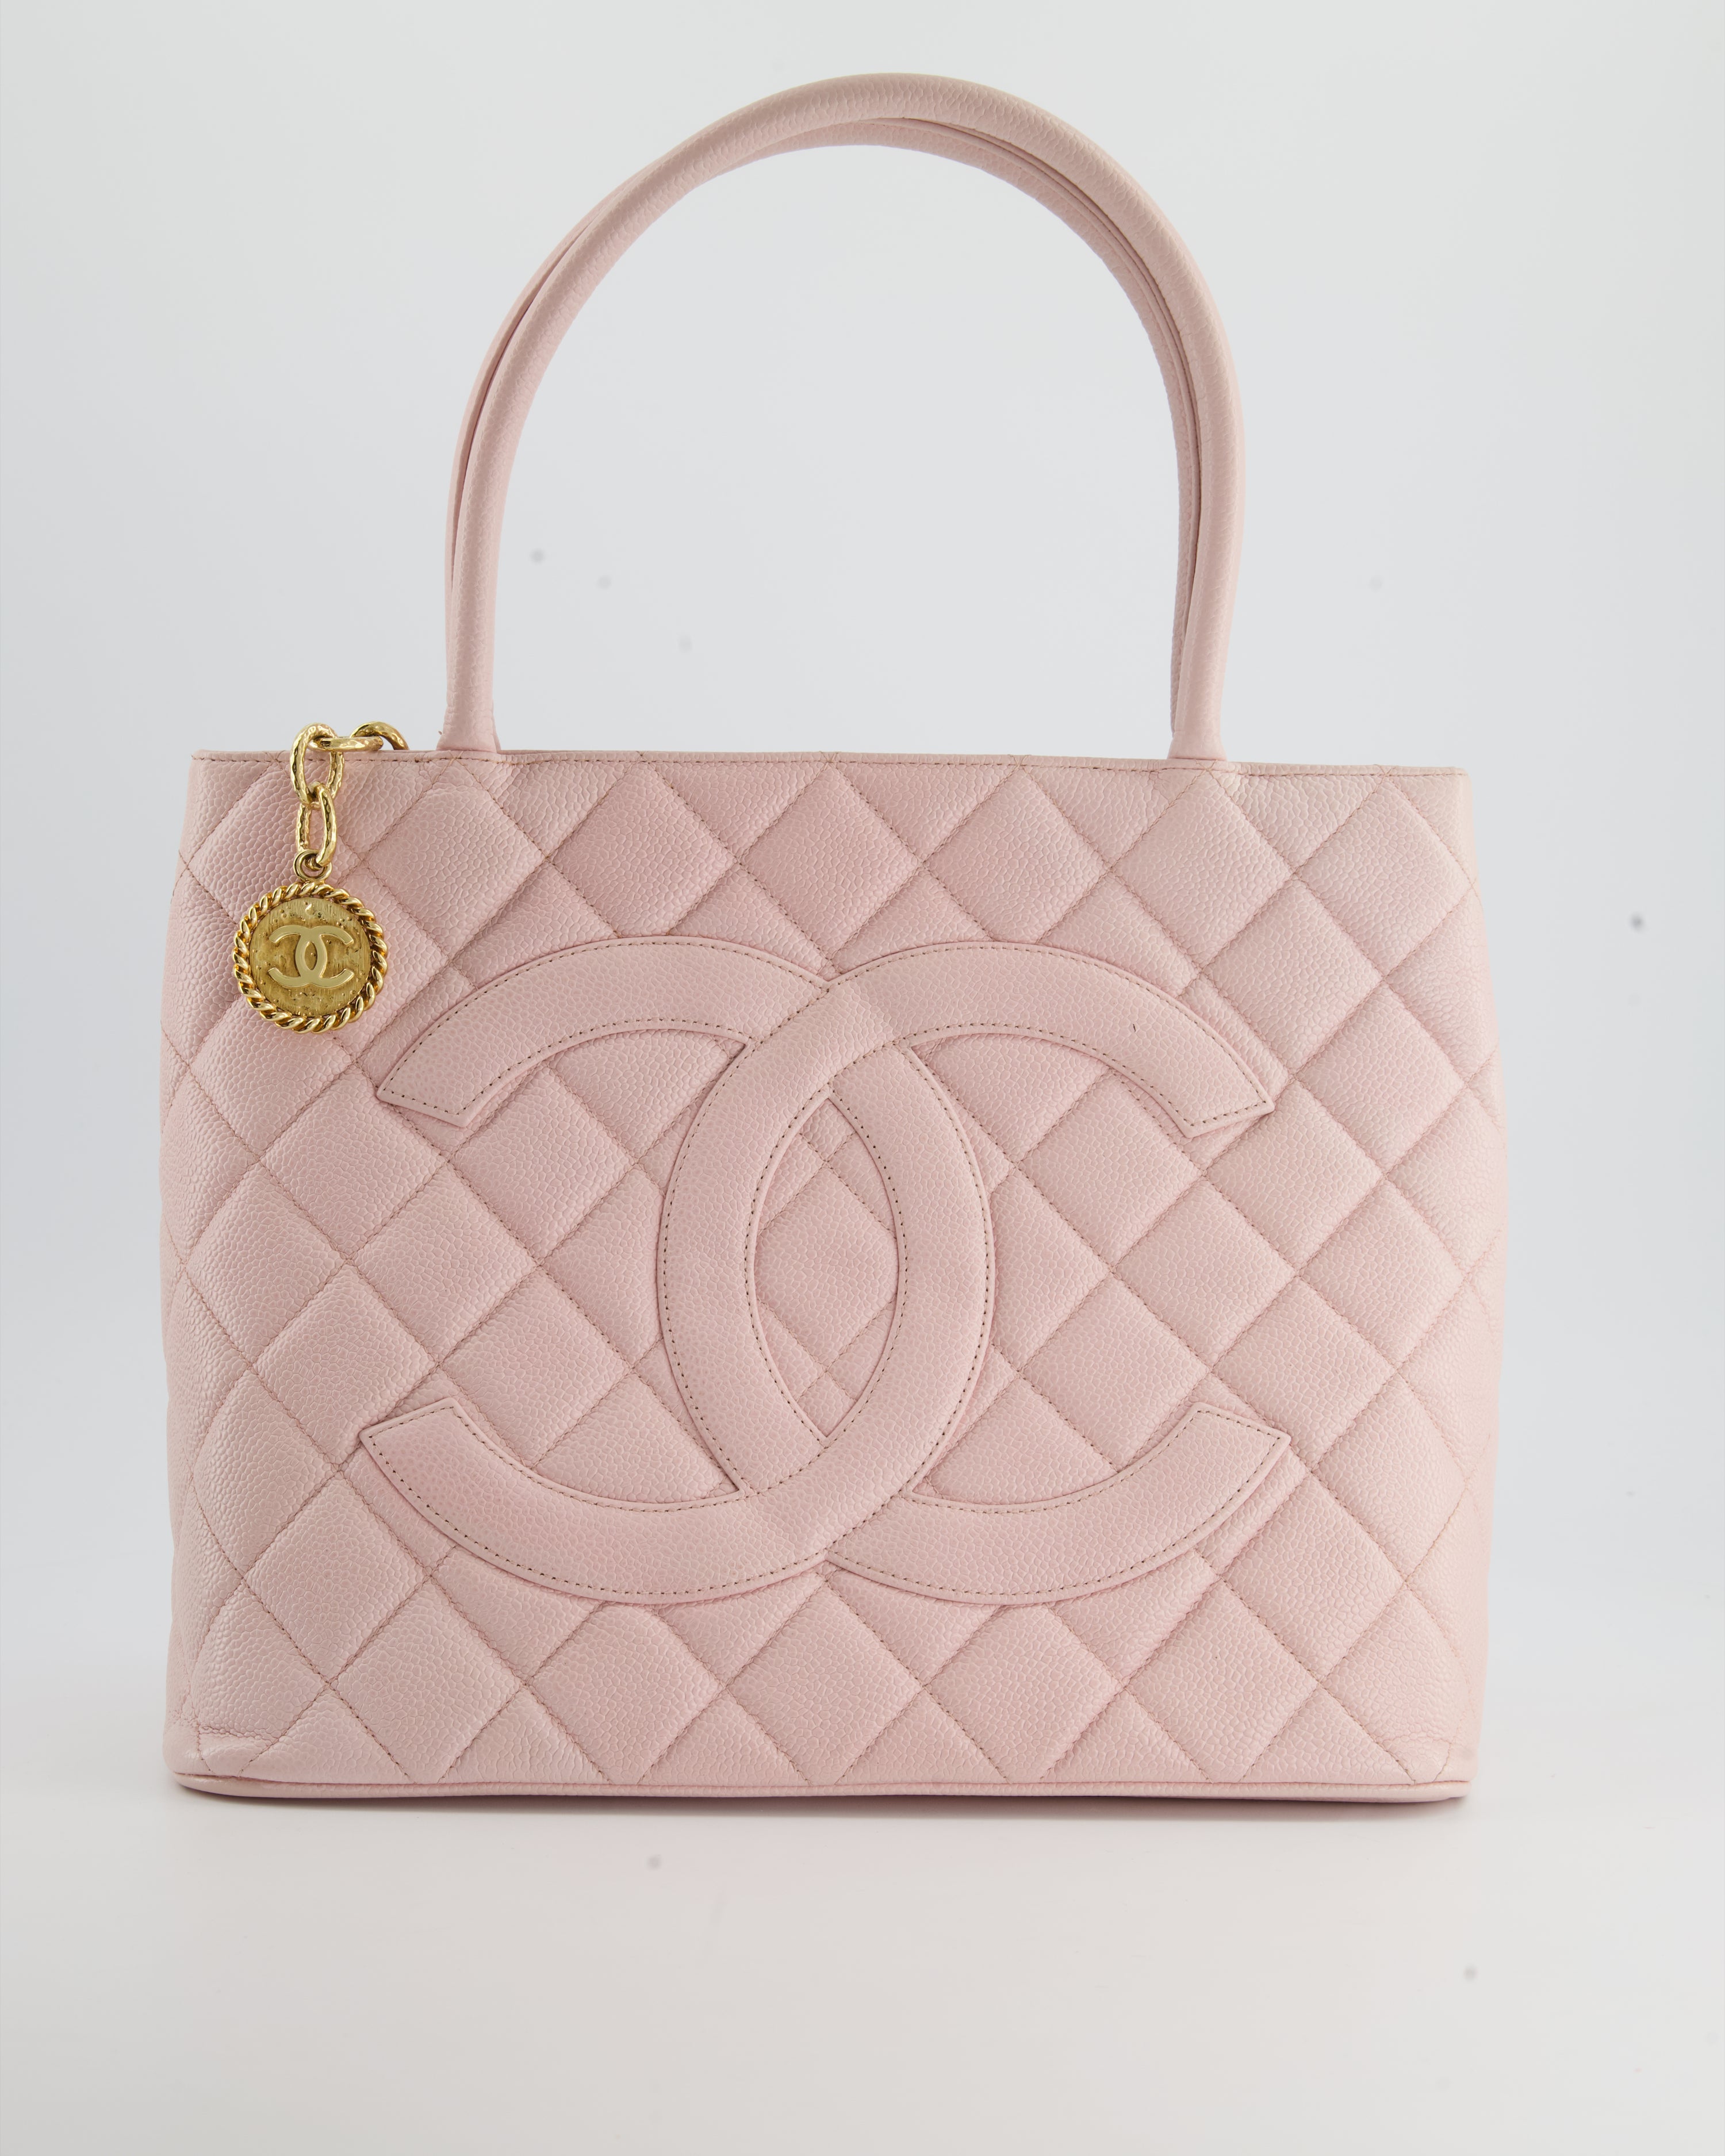 Chanel // 2002 - 2003 Beige Caviar Leather Medallion Tote Bag